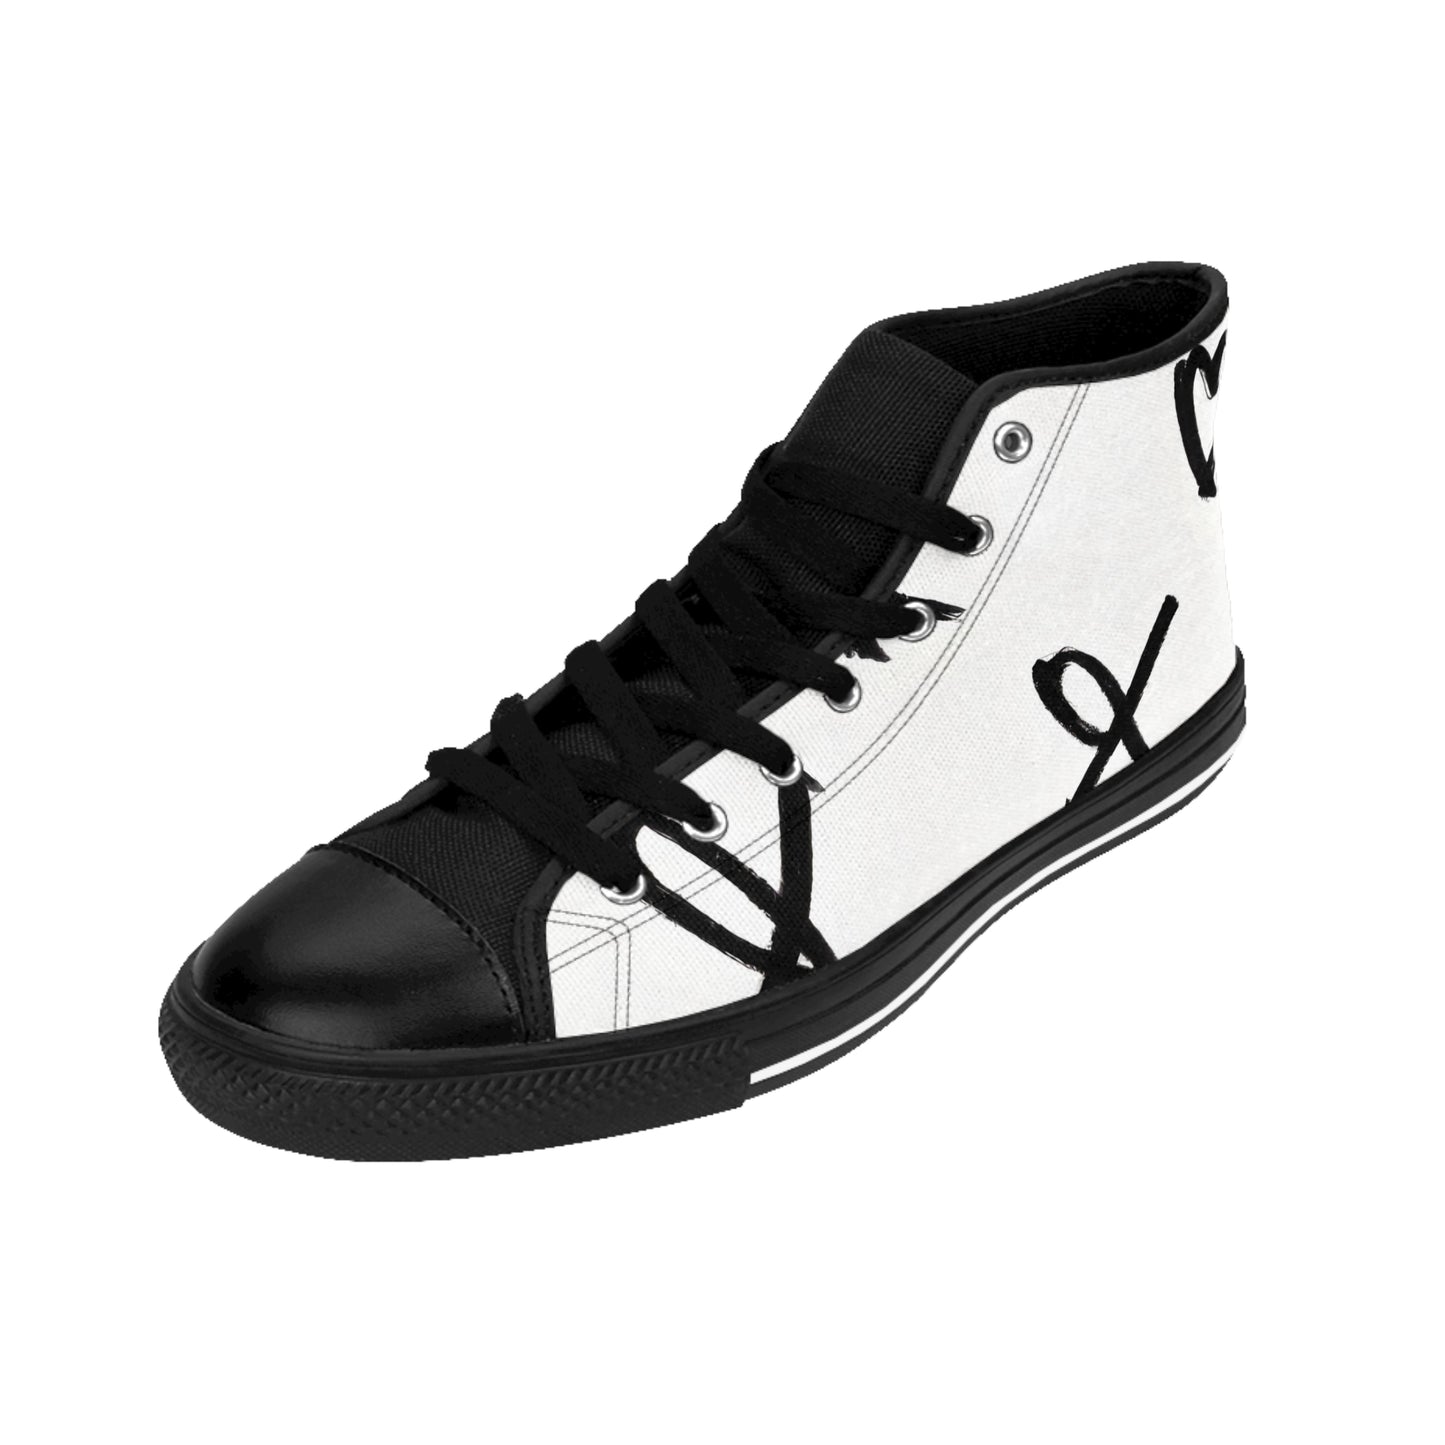 Cion Evelyn - Women's Classic HIgh-Top Sneakers